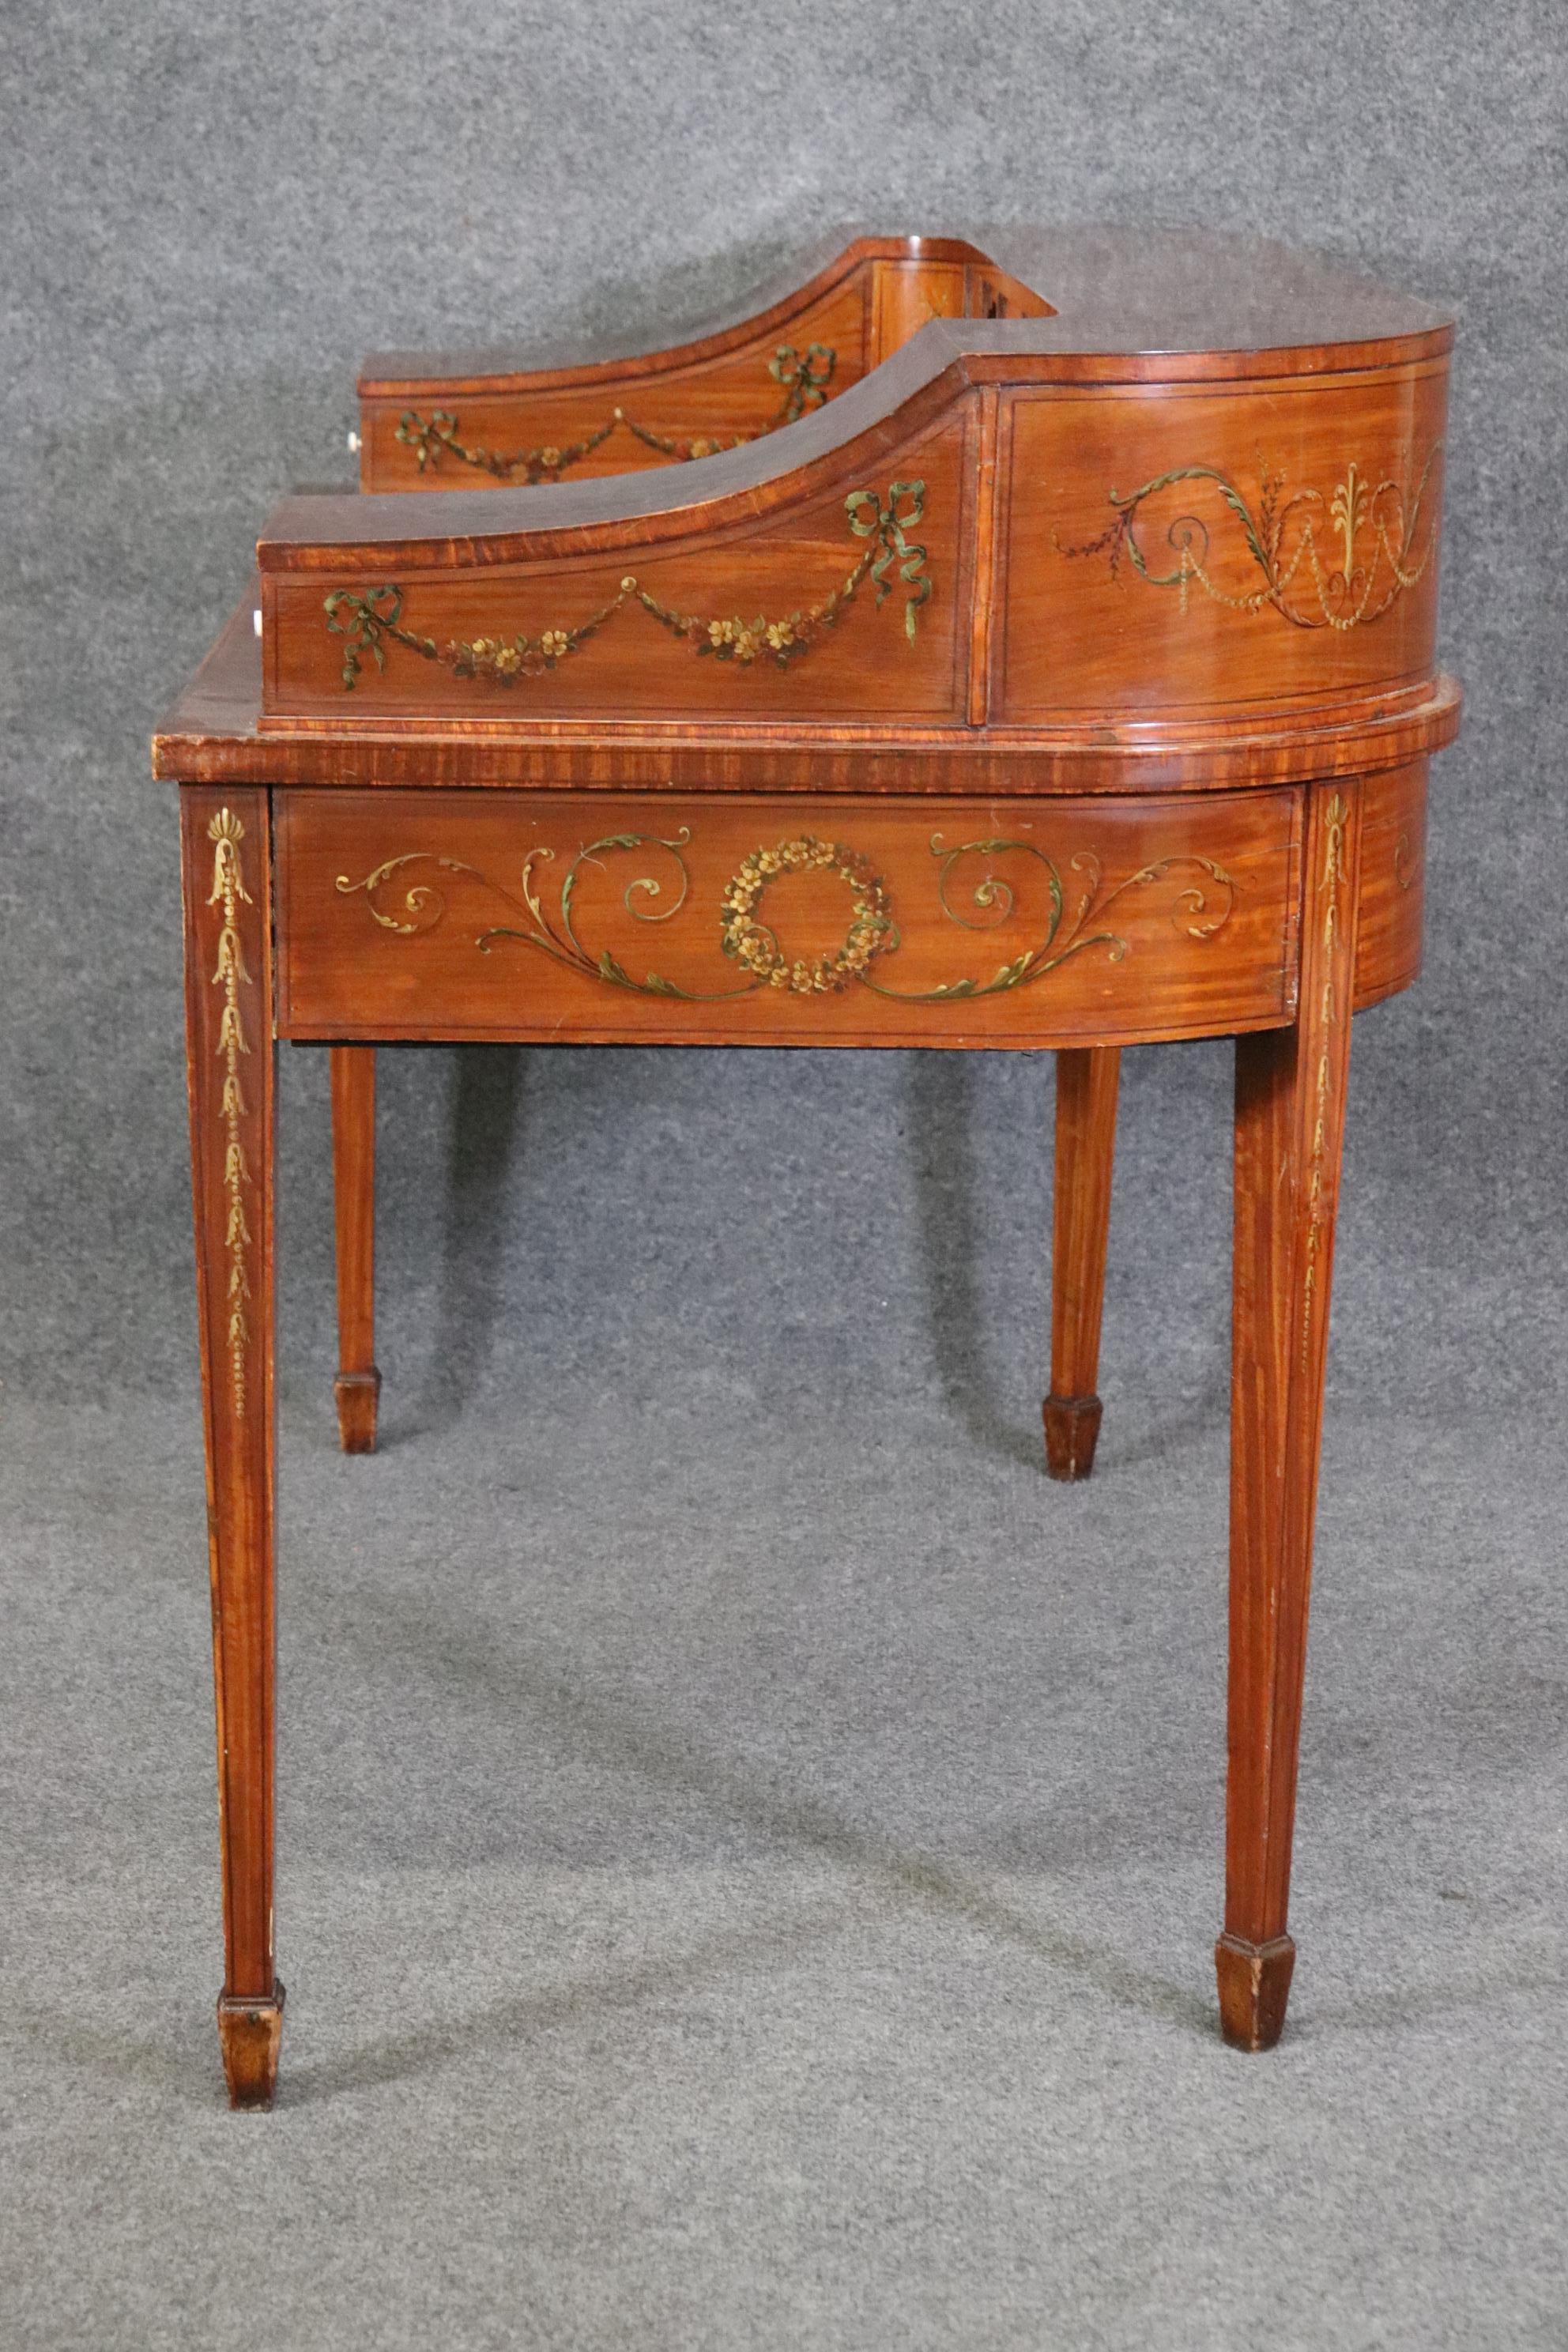 Fine Quality English Satinwood Carlton House Desk with Cherubs and Musical Theme 3